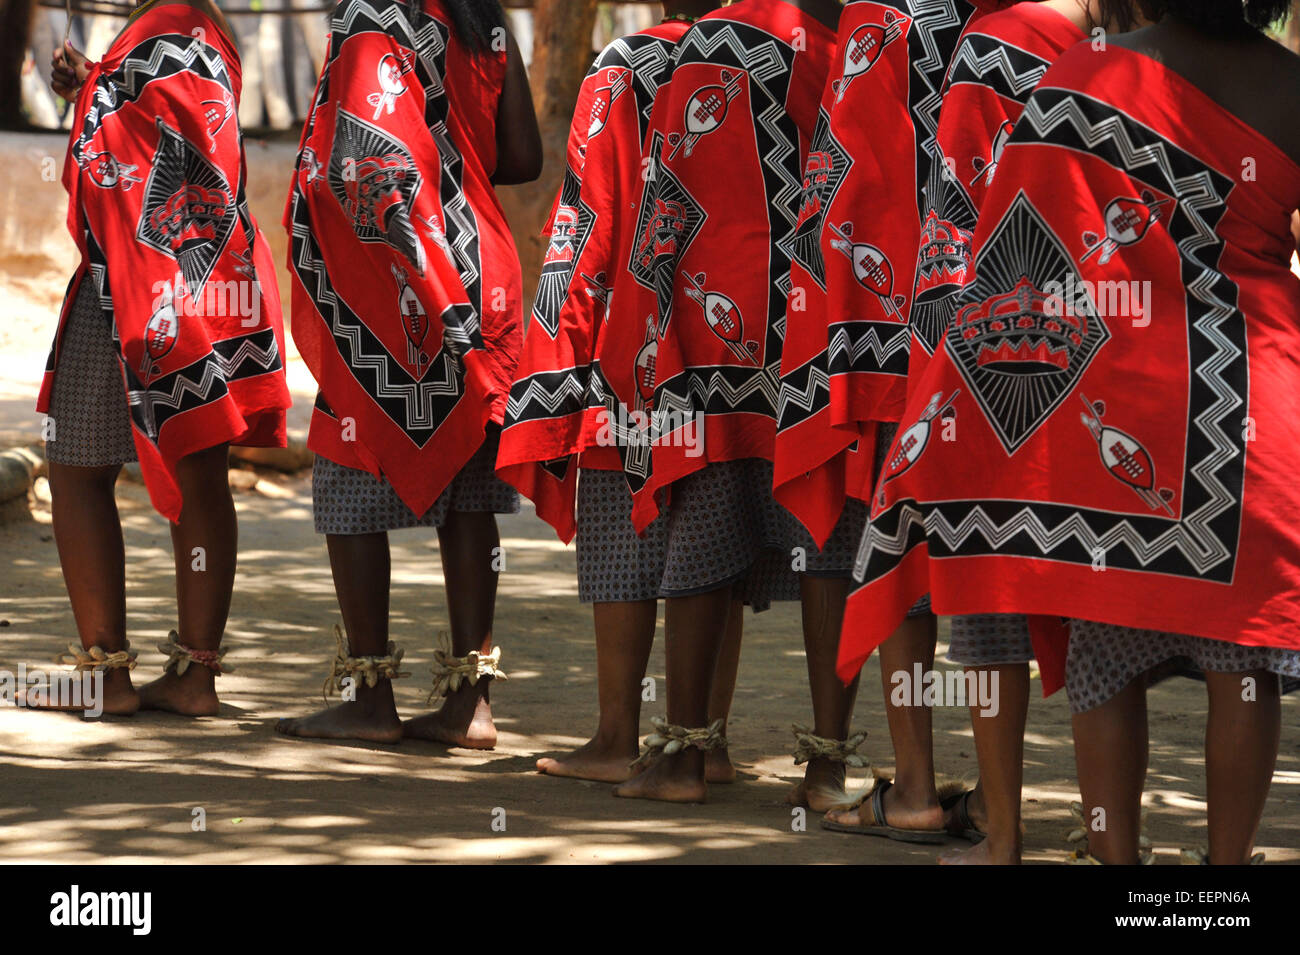 Colourful traditional red dresses of Swazi women dancers dancing in a row, performing a dance at Matsamo culture village, Swaziland Stock Photo